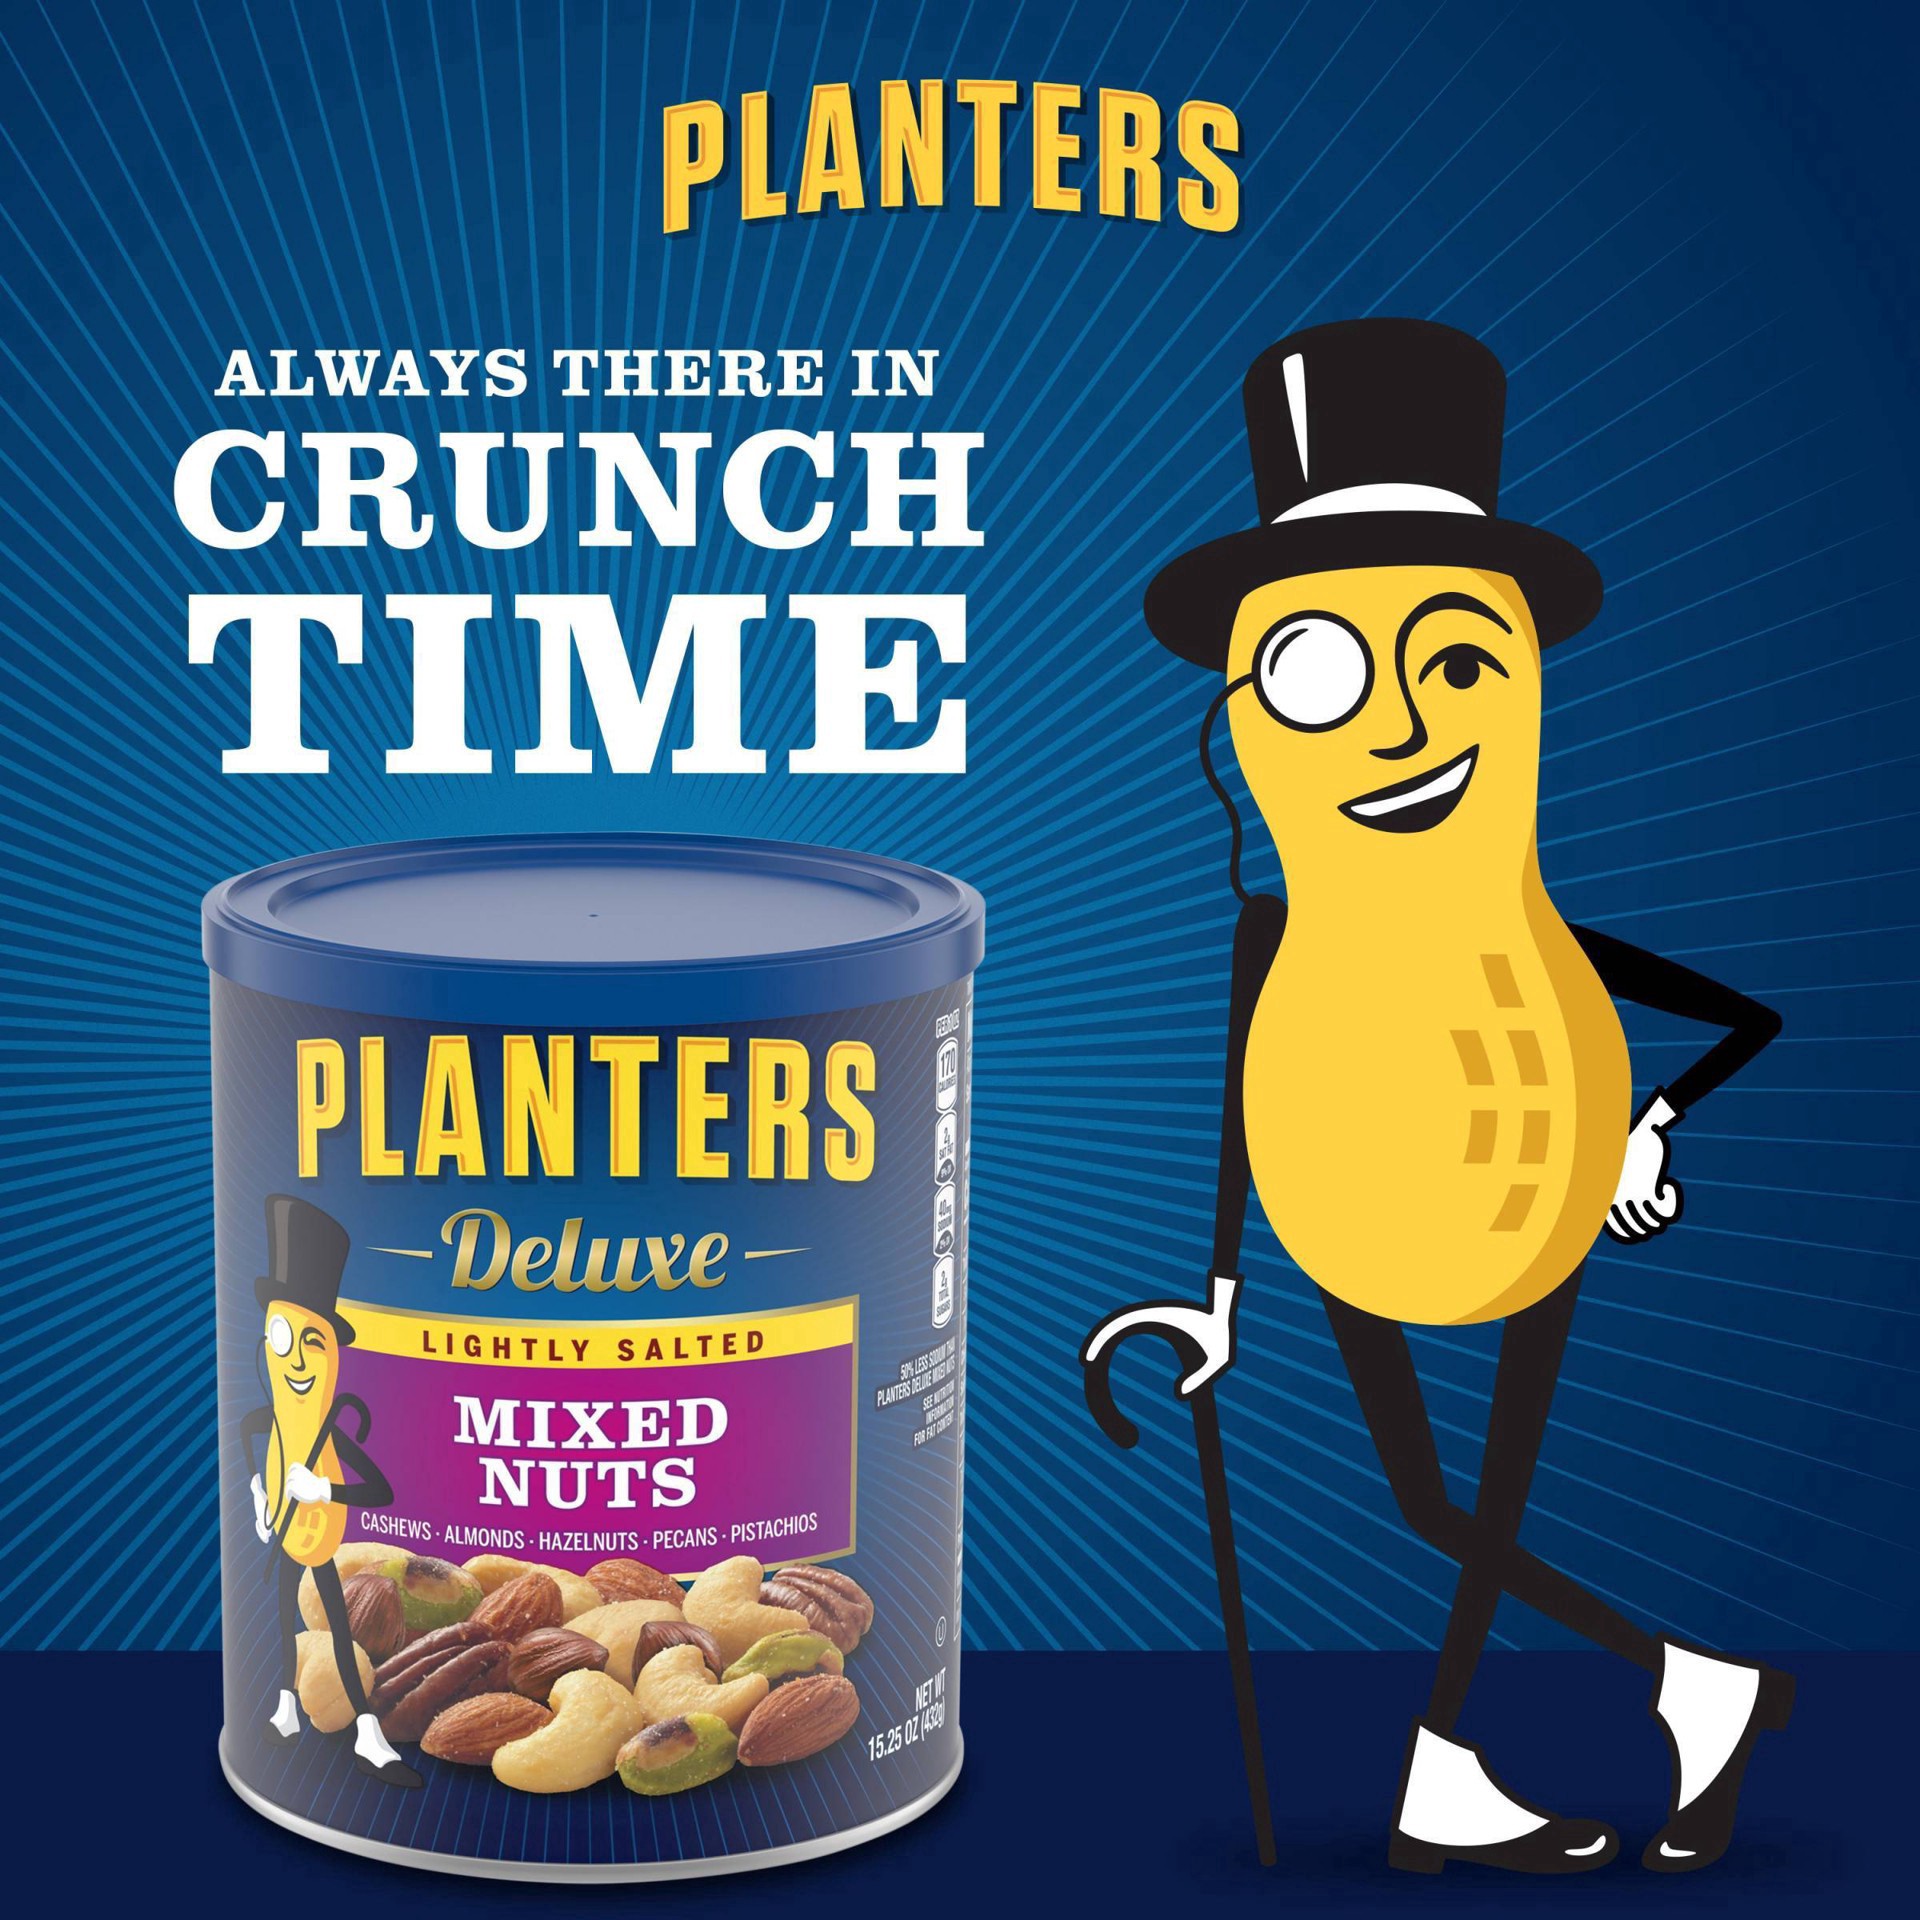 slide 23 of 46, Planters Deluxe Lightly Salted Mixed Nuts 15.25 oz, 15.25 oz